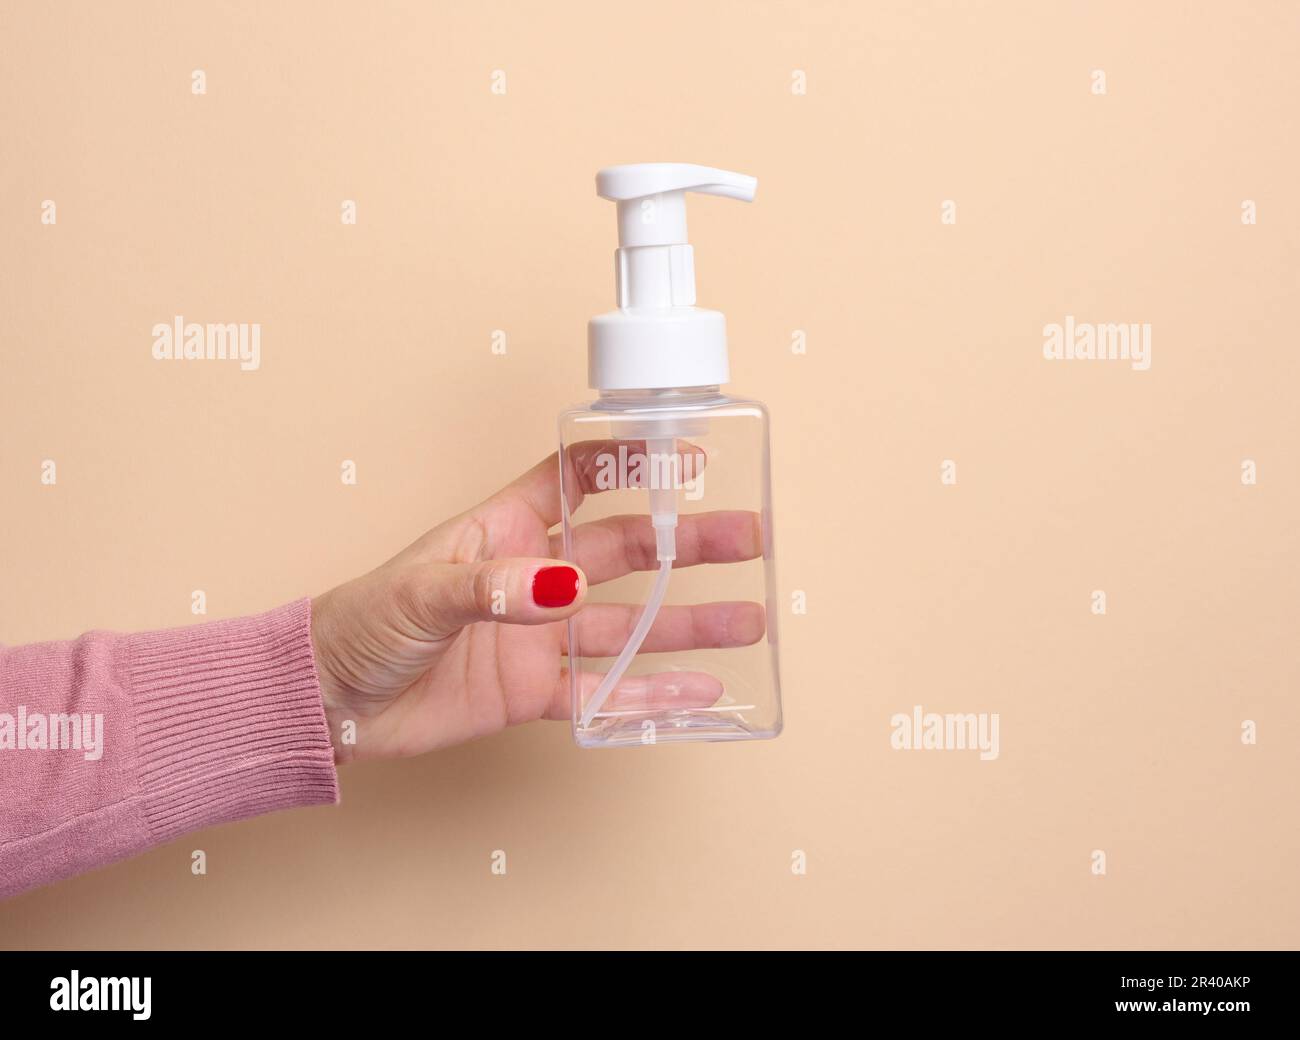 https://c8.alamy.com/comp/2R40AKP/female-hand-holds-empty-plastic-container-with-dispenser-for-liquid-products-soap-or-shampoo-on-beige-background-2R40AKP.jpg